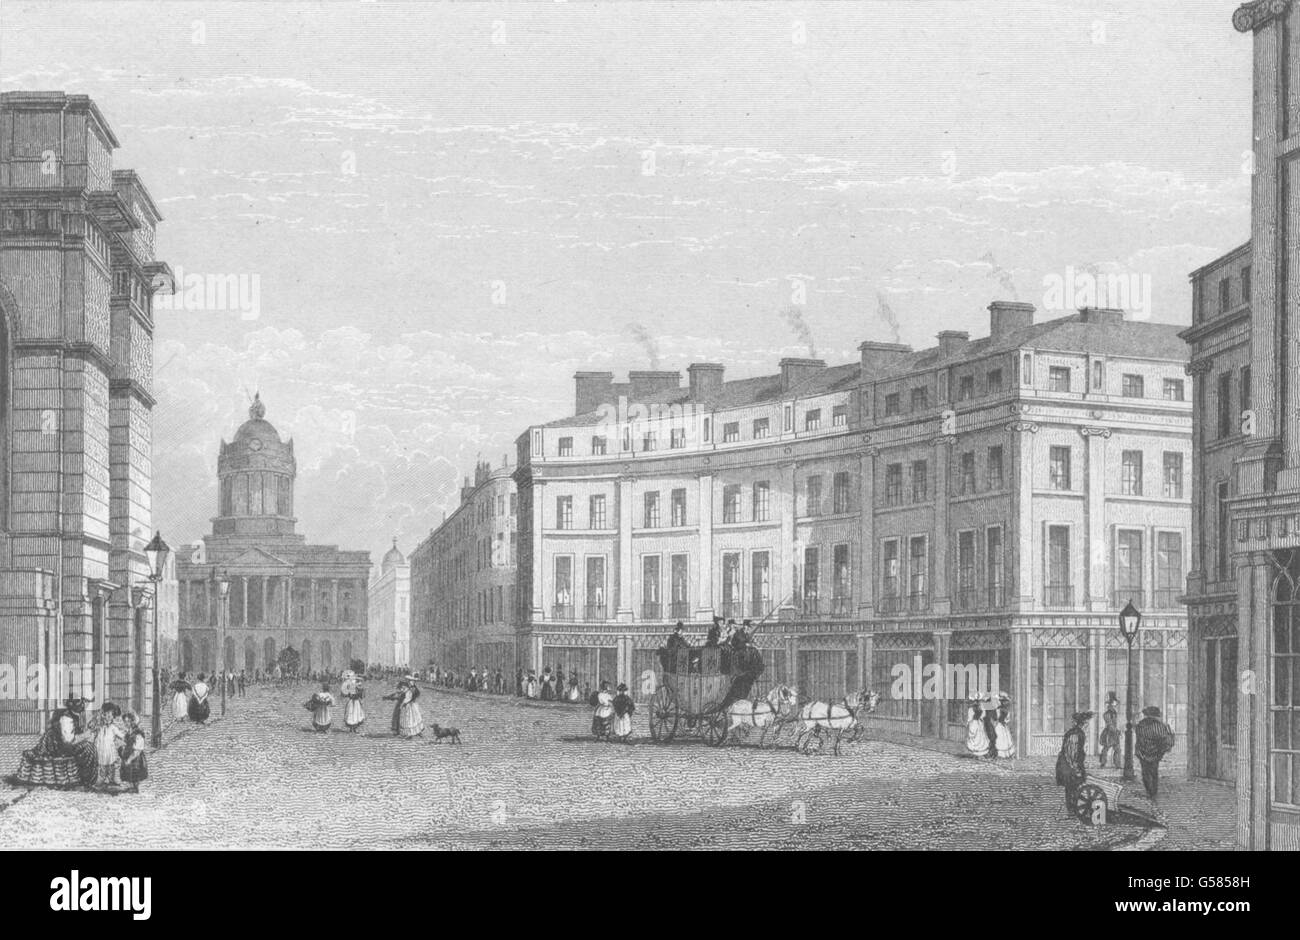 LIVERPOOL: St. George's Crescent & Castle Street. Harwood, antica stampa 1831 Foto Stock